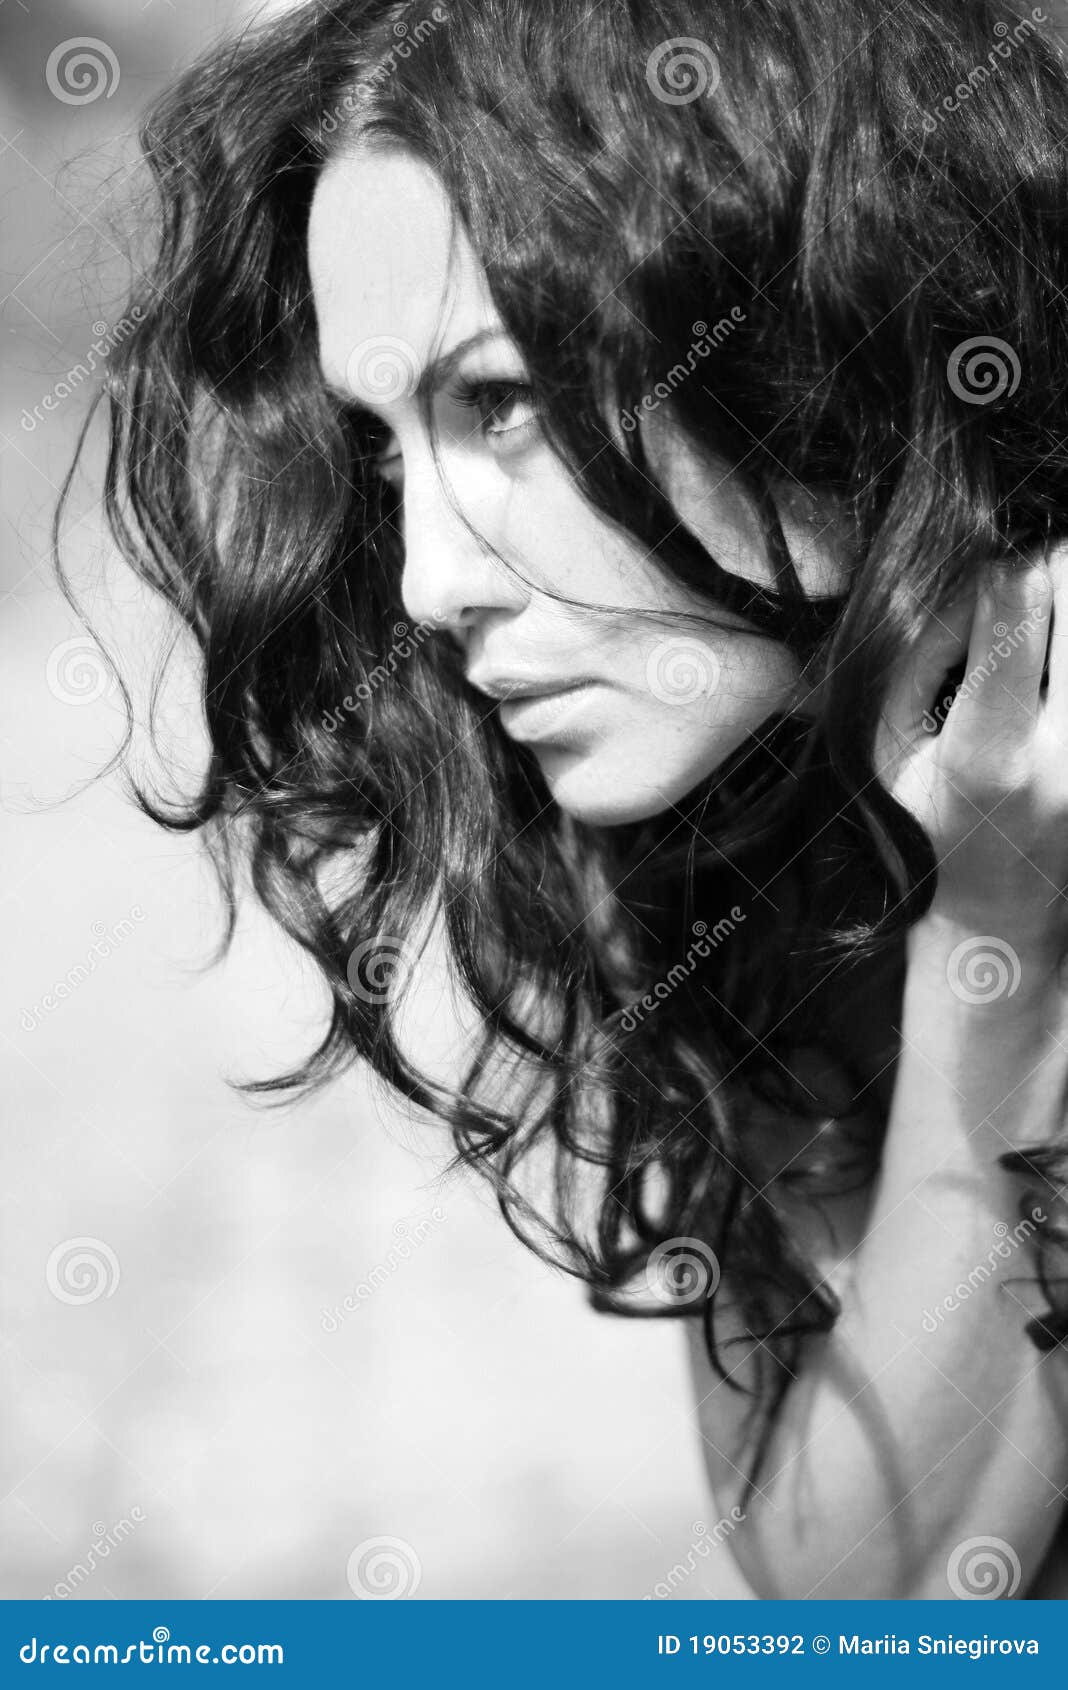 desaturated portrait of young beauty woman